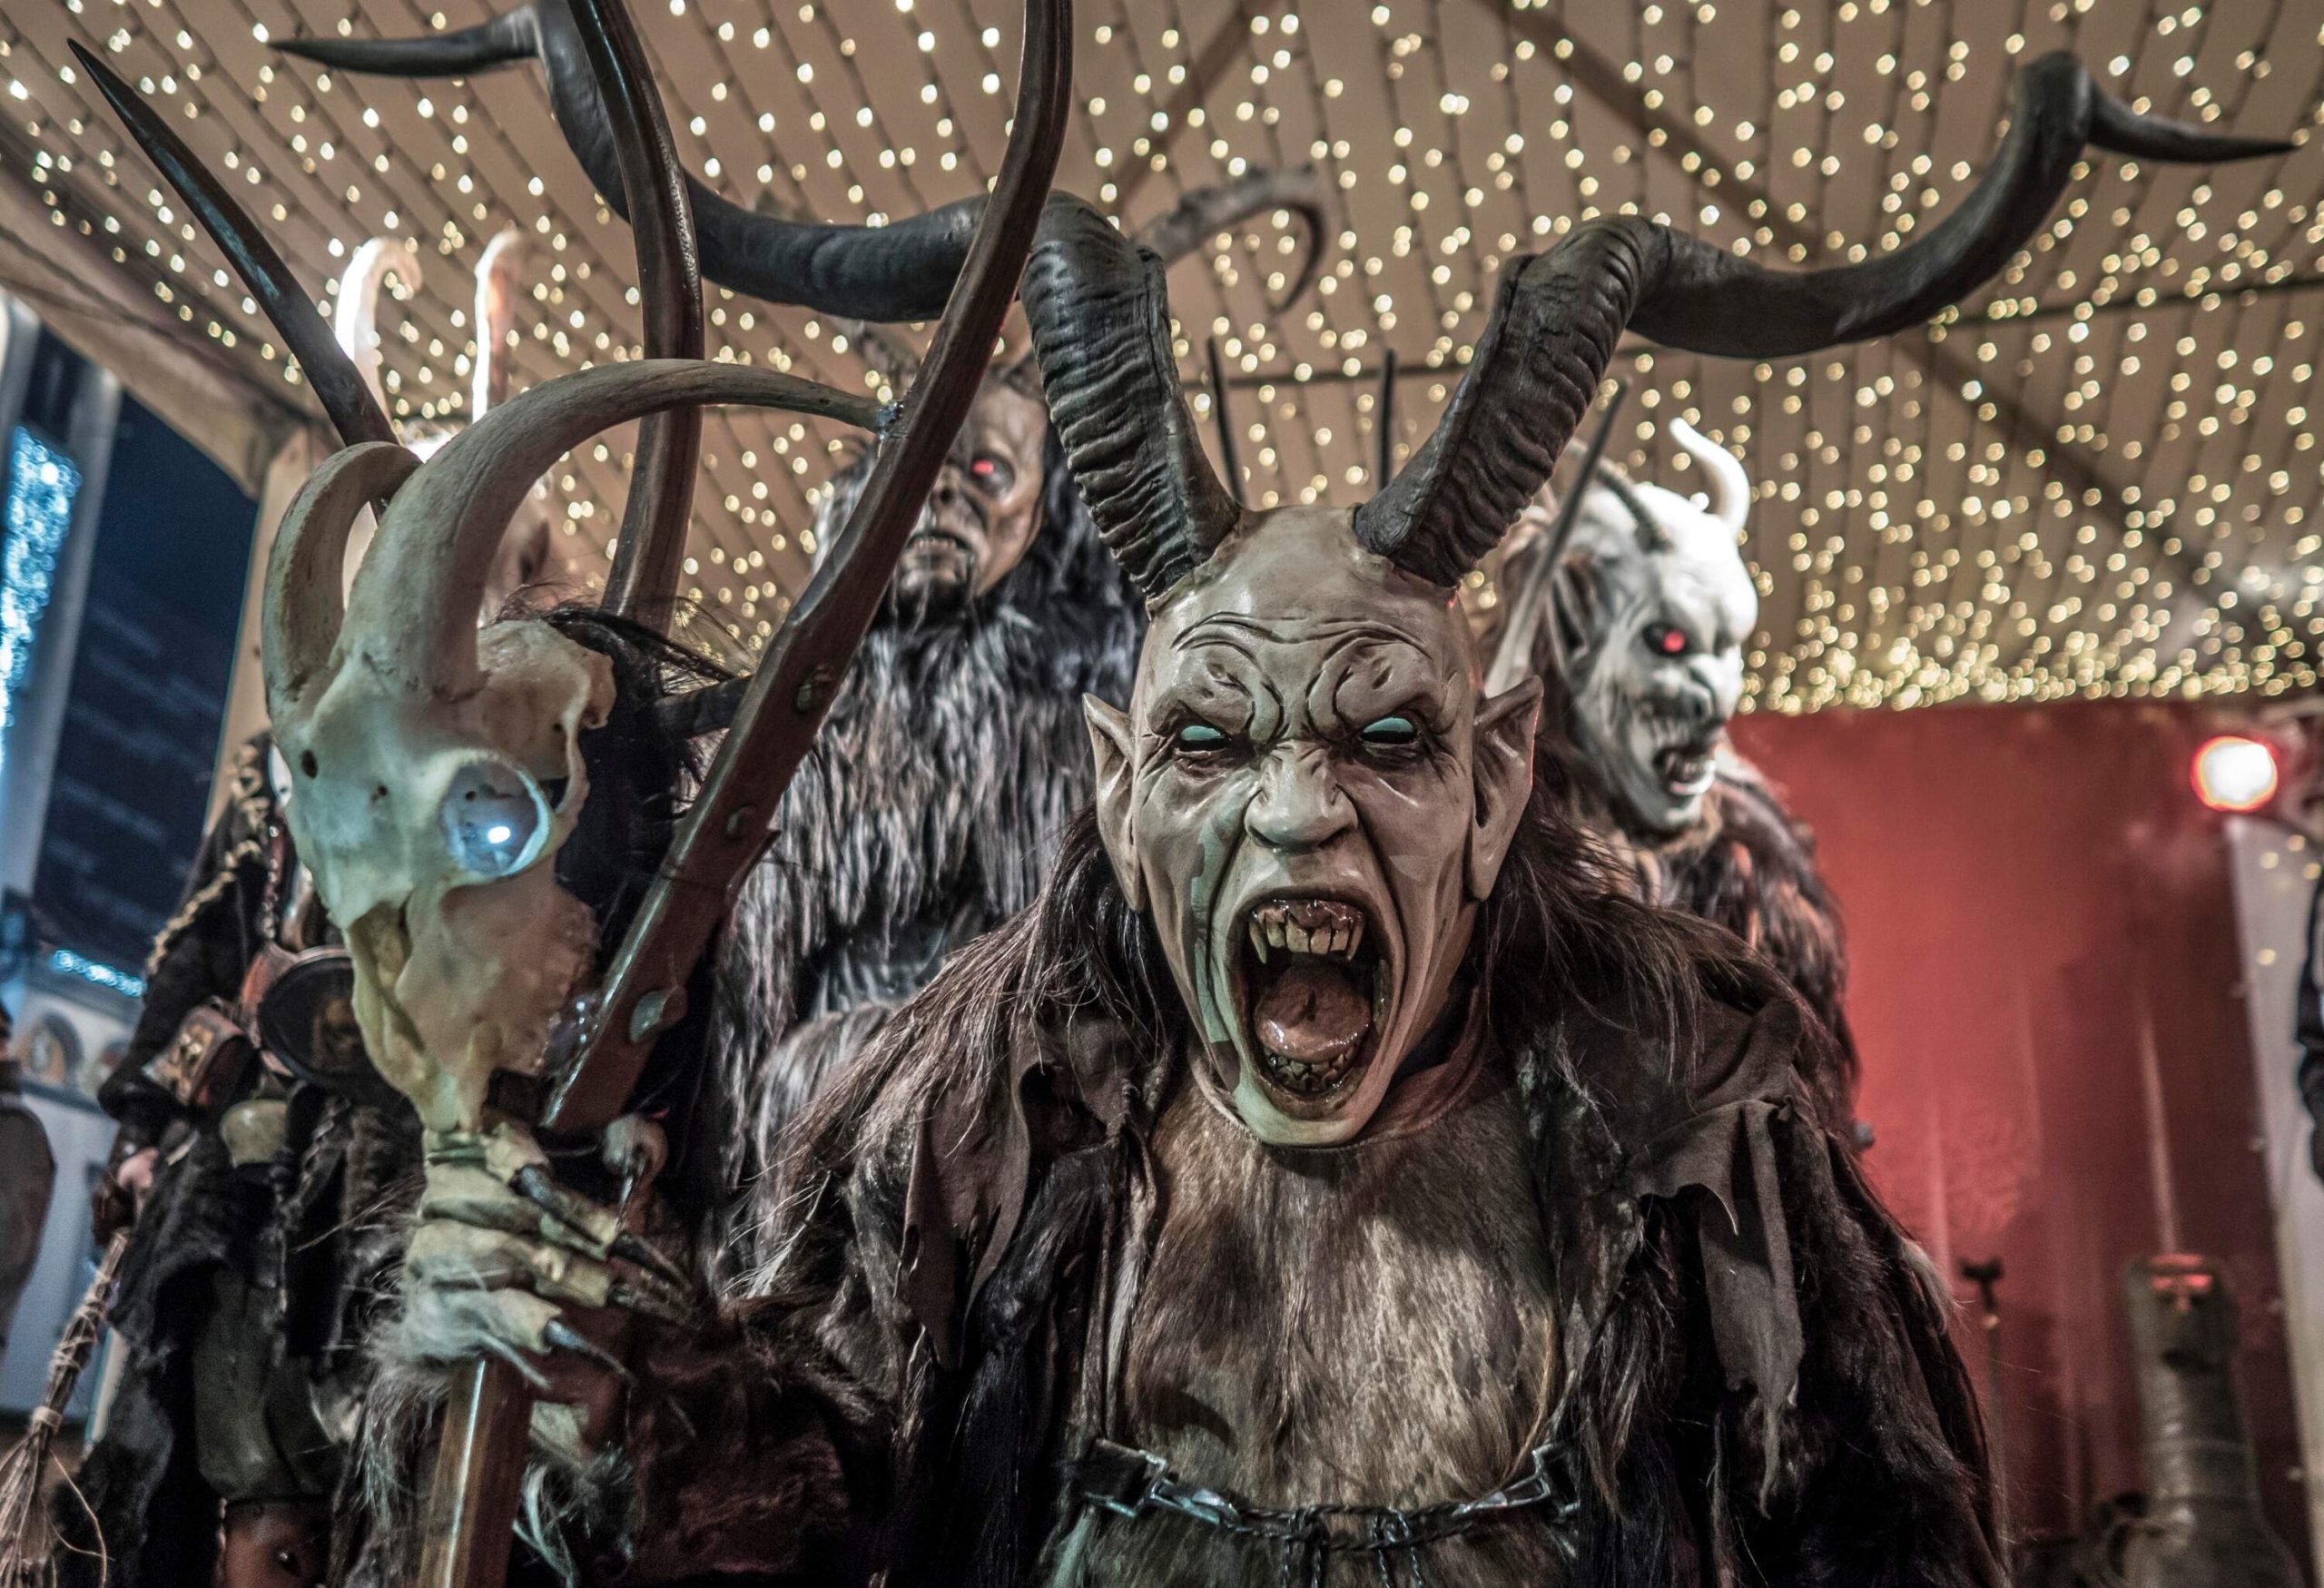 A statue of Krampus and other horned figures under a canopy of string lights.